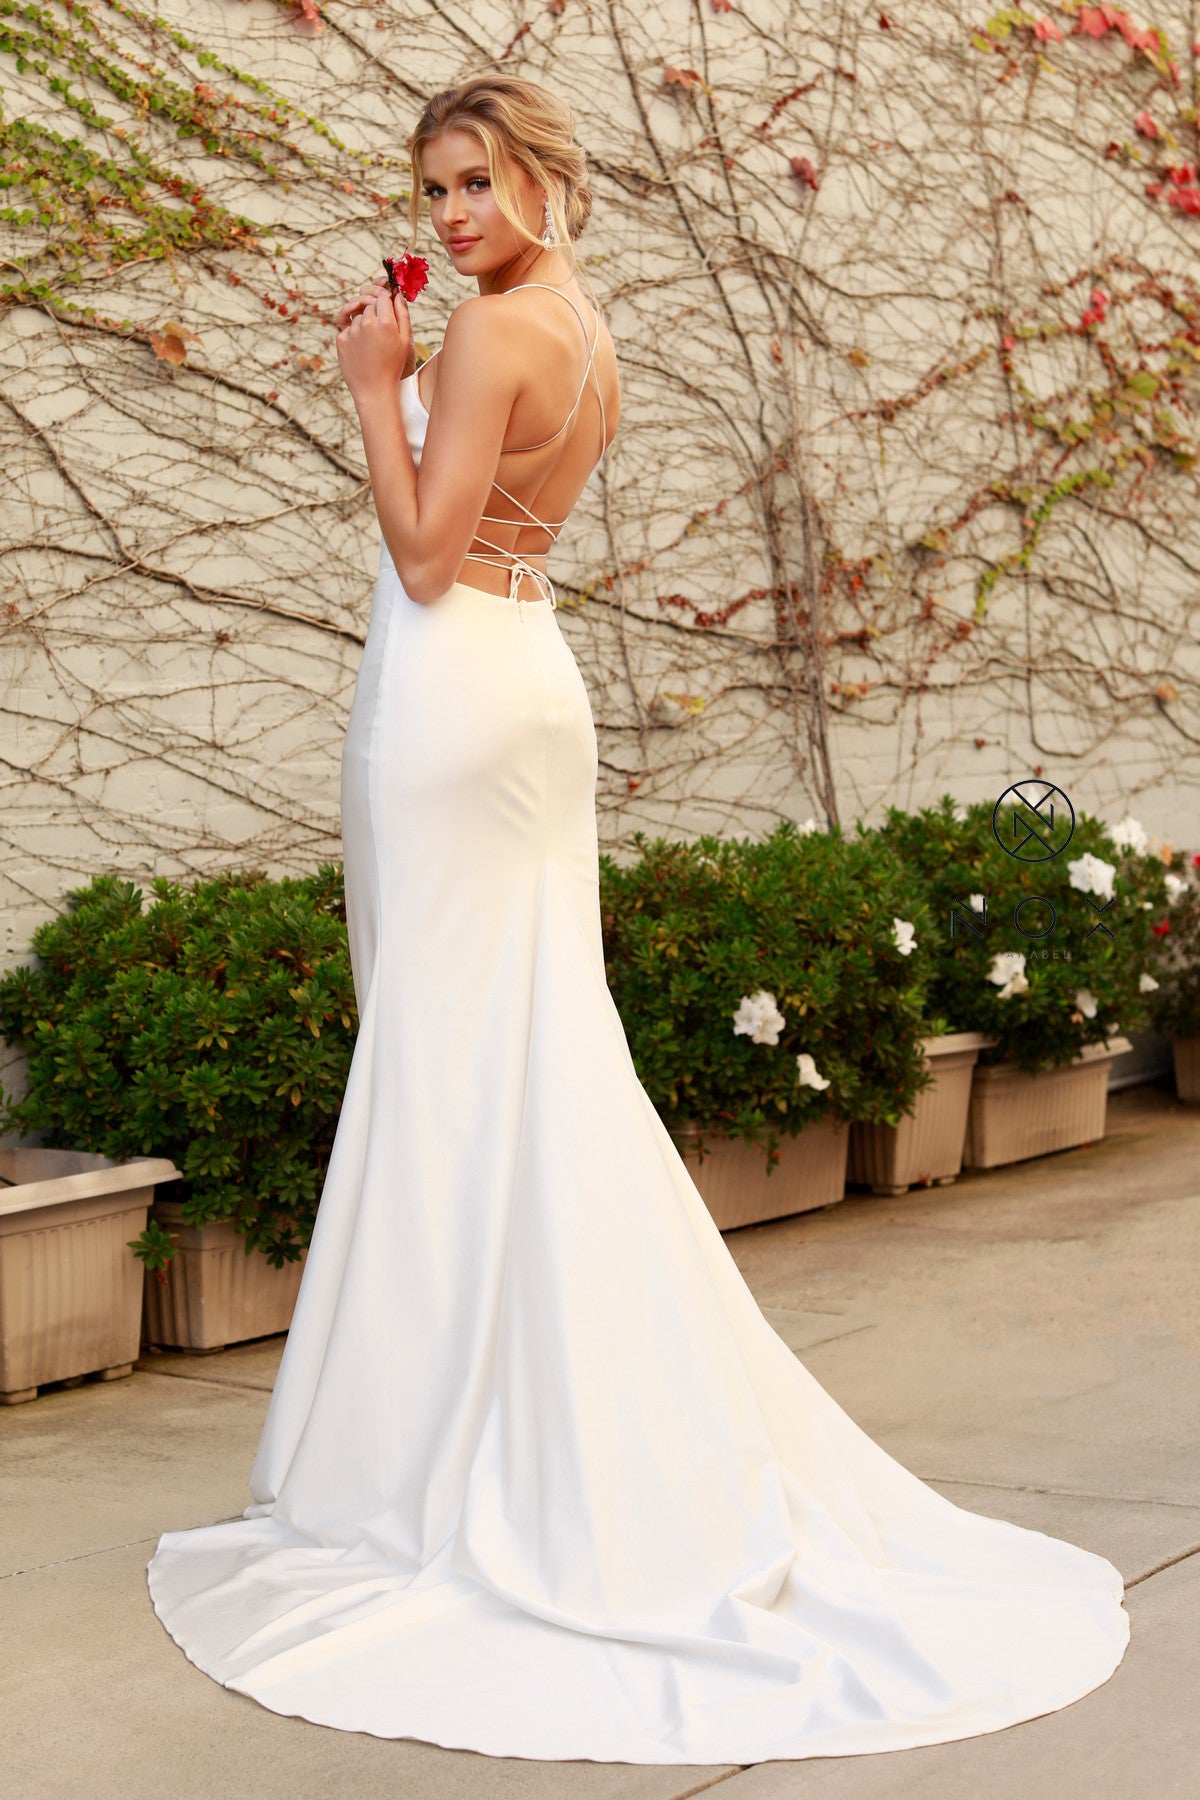 Everlasting Love Cowl Neck Wedding Dress: White - Bella and Bloom Boutique